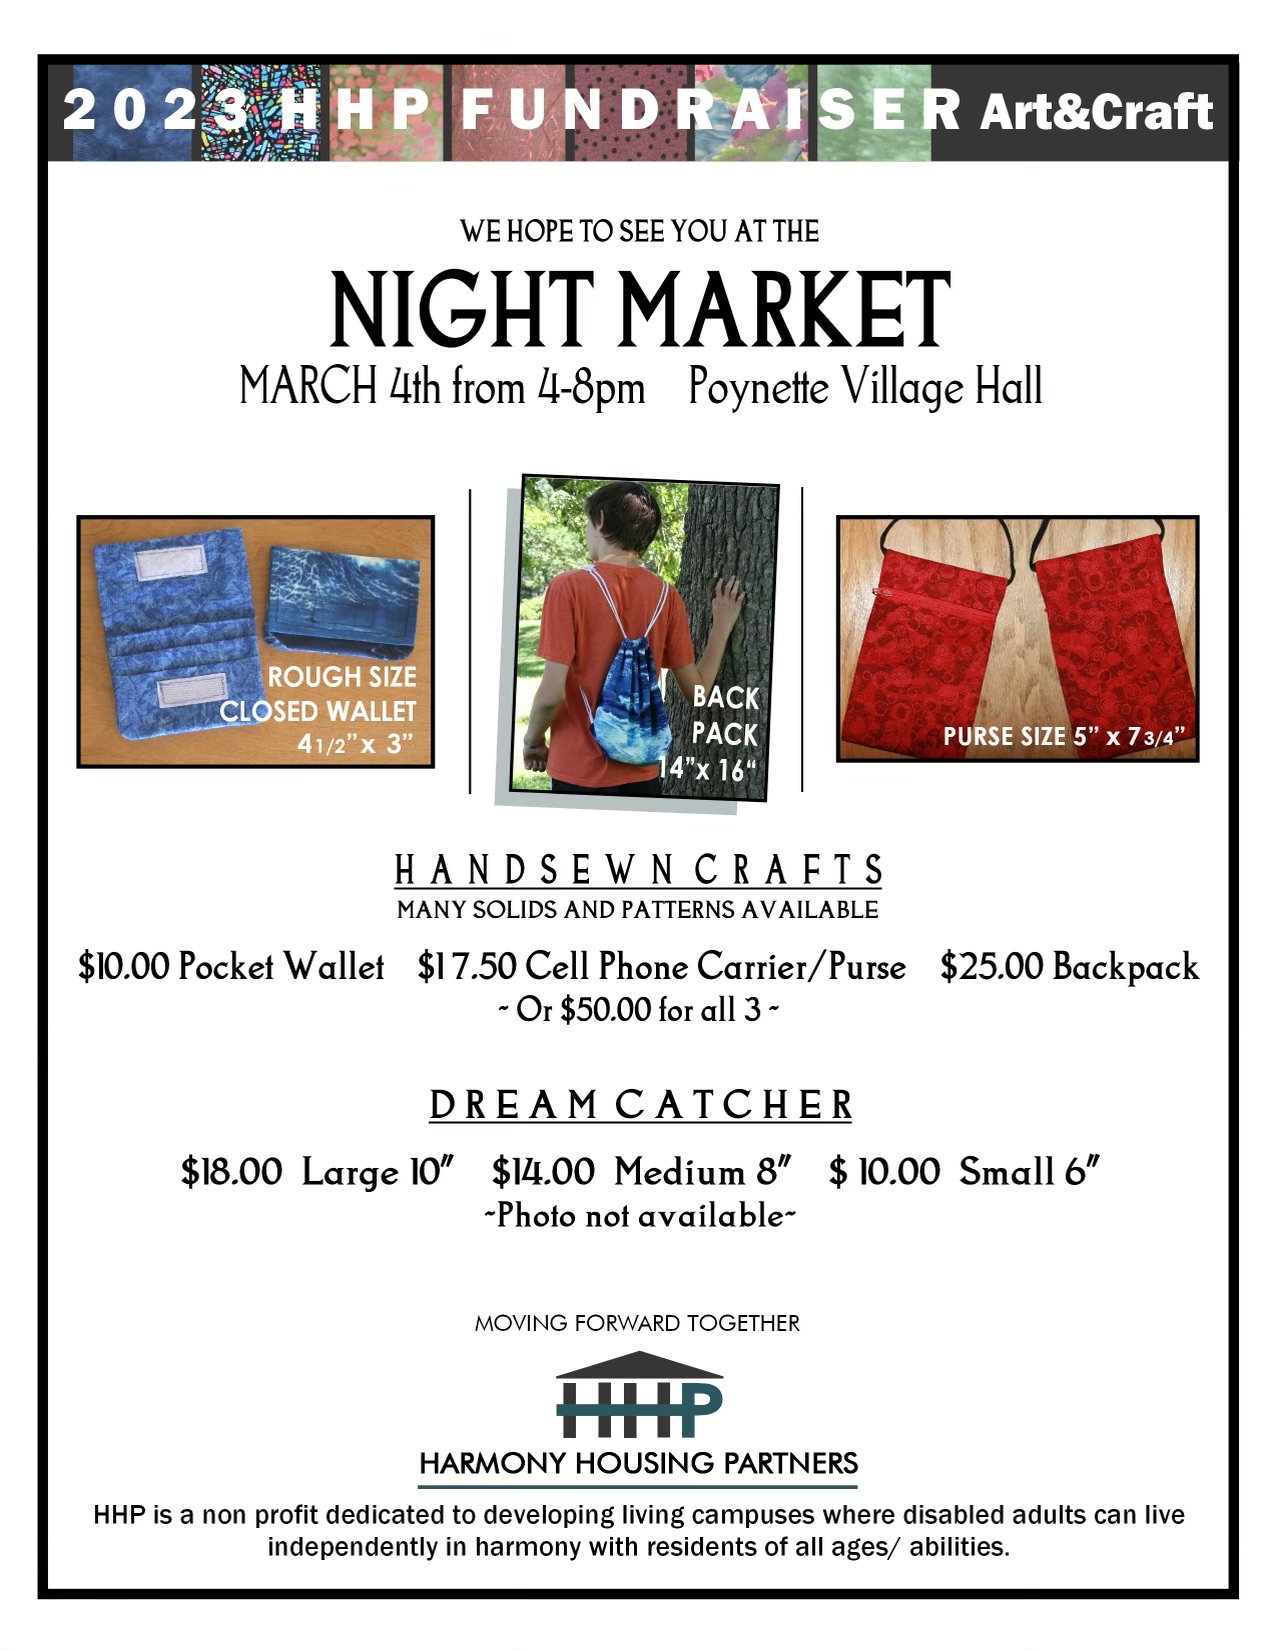 WE HOPE TO SEE YOU AT THE NIGHT MARKET MARCH 4th from 4-8pm Poynette Village Hall